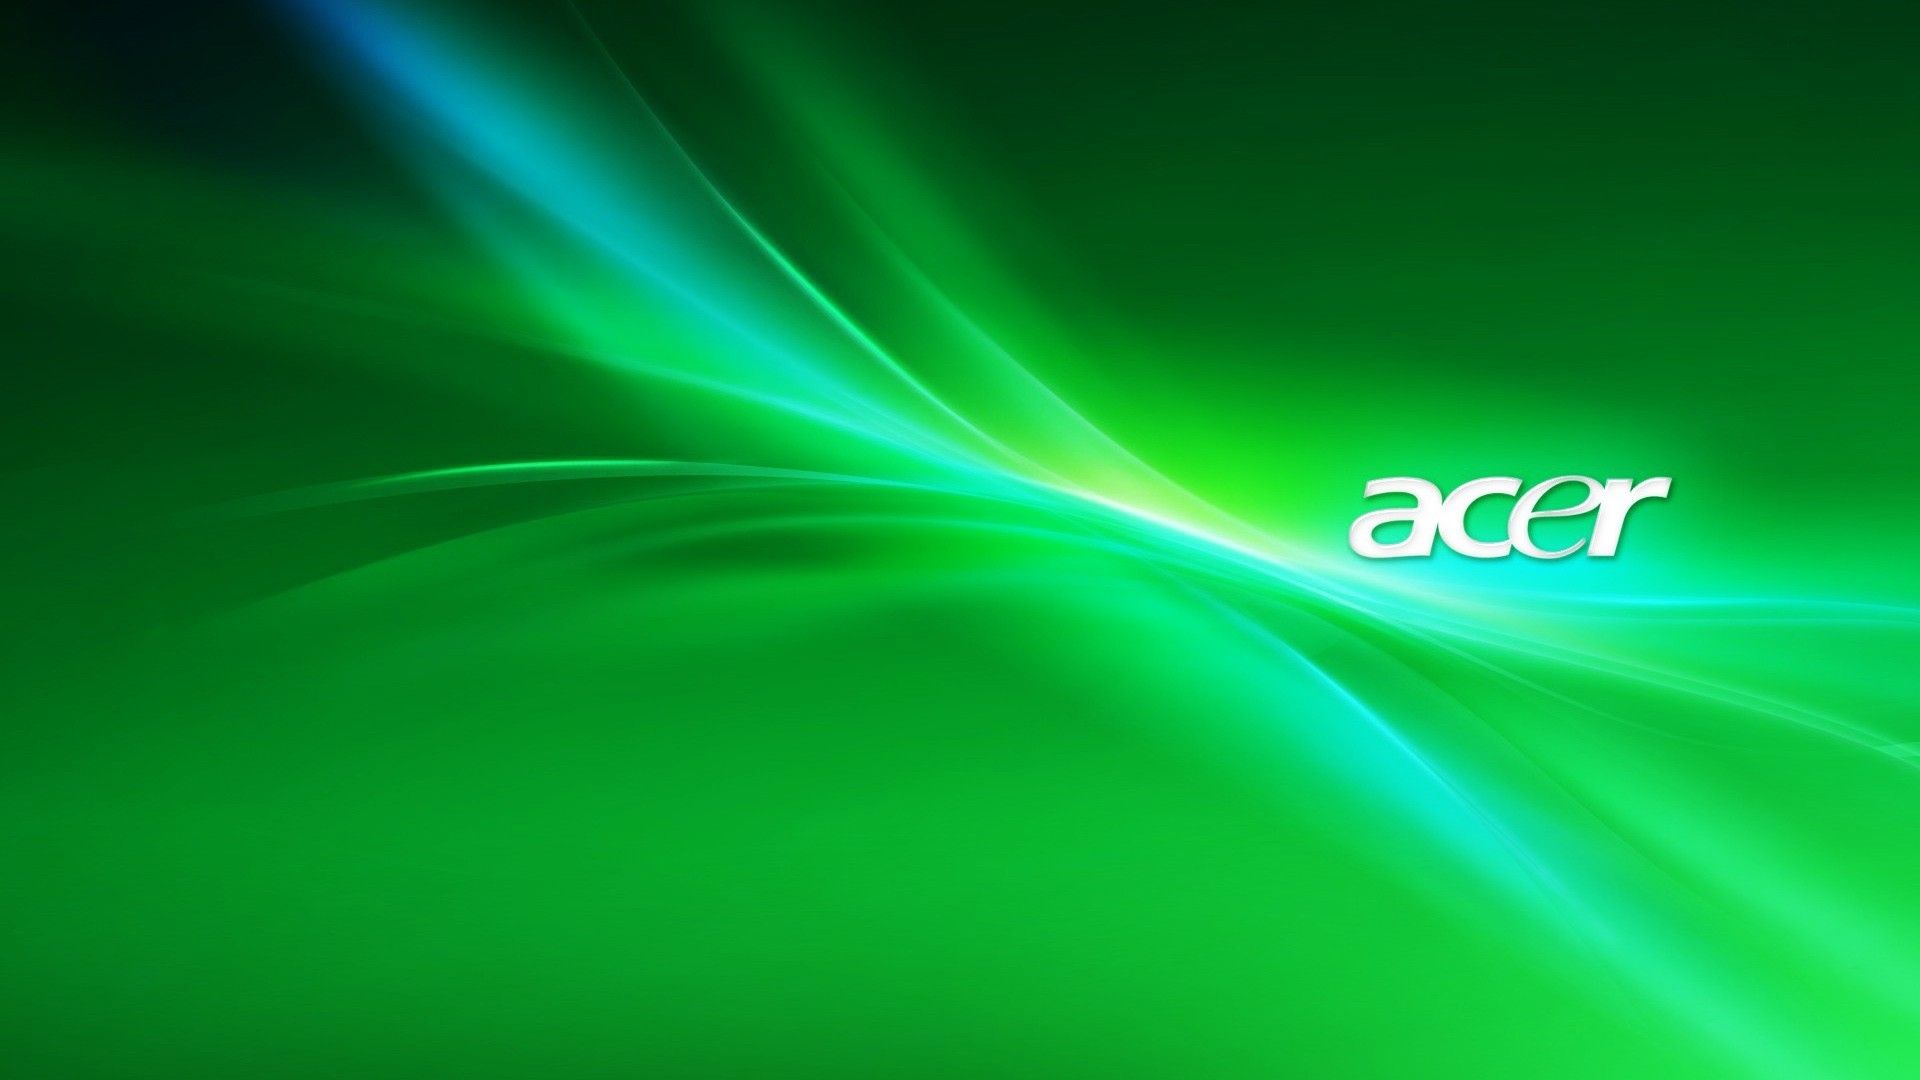 X acer hd green wallpaper wallpaper d wallpapers with hd resolution acer laptop backgrounds laptop acer